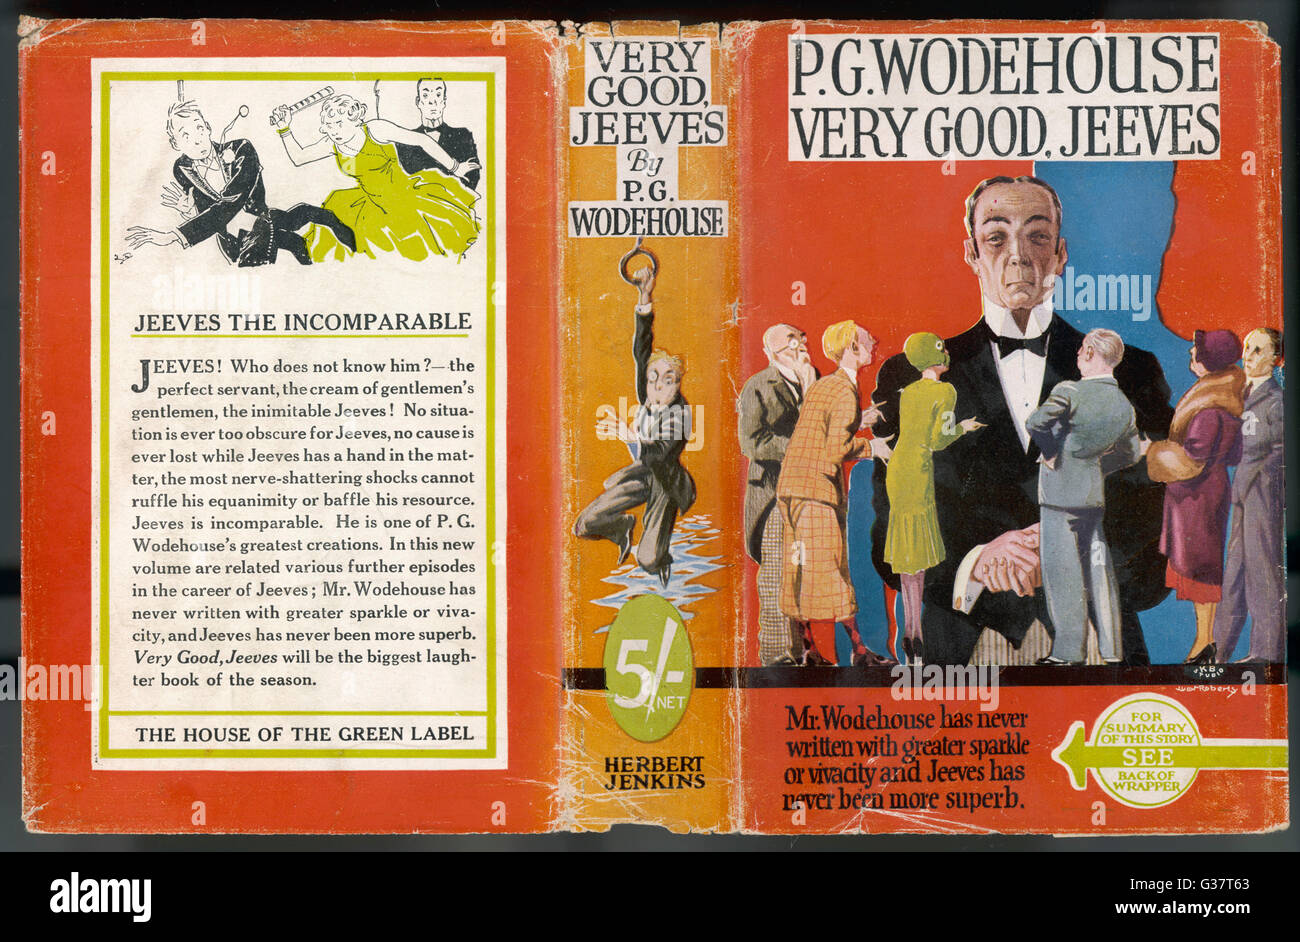 Wodehouse - Jeeves - Butler Banque D'Images